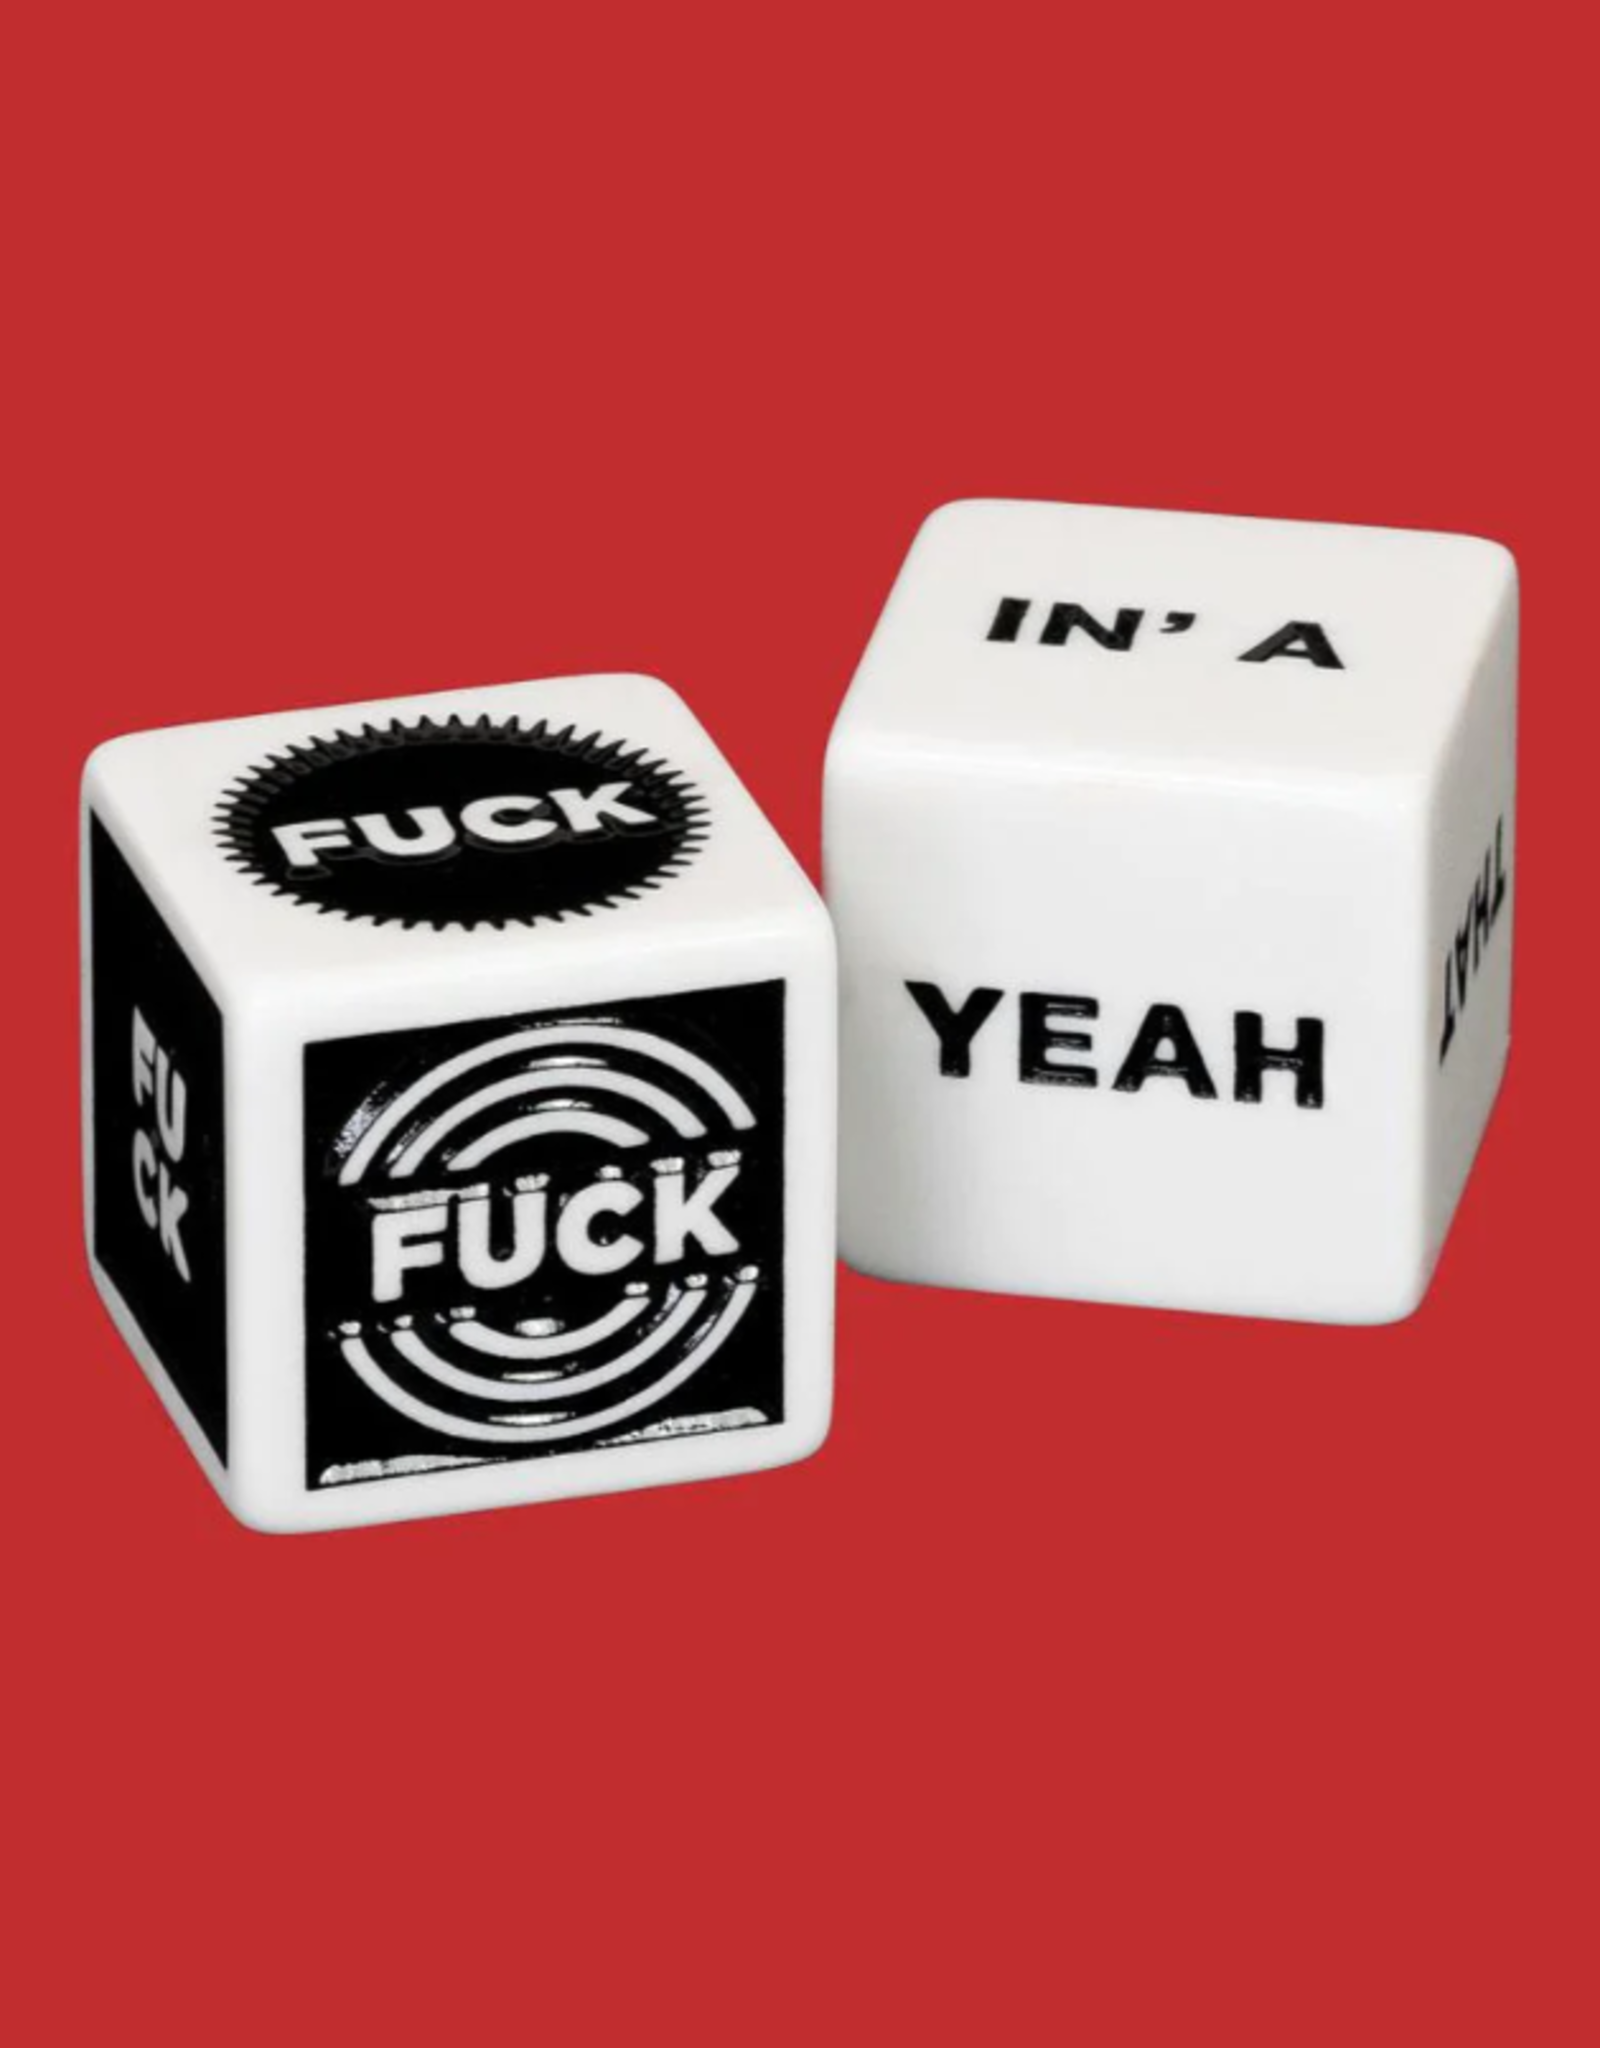 Chronicle Books Fuck Yeah! Decision Dice*